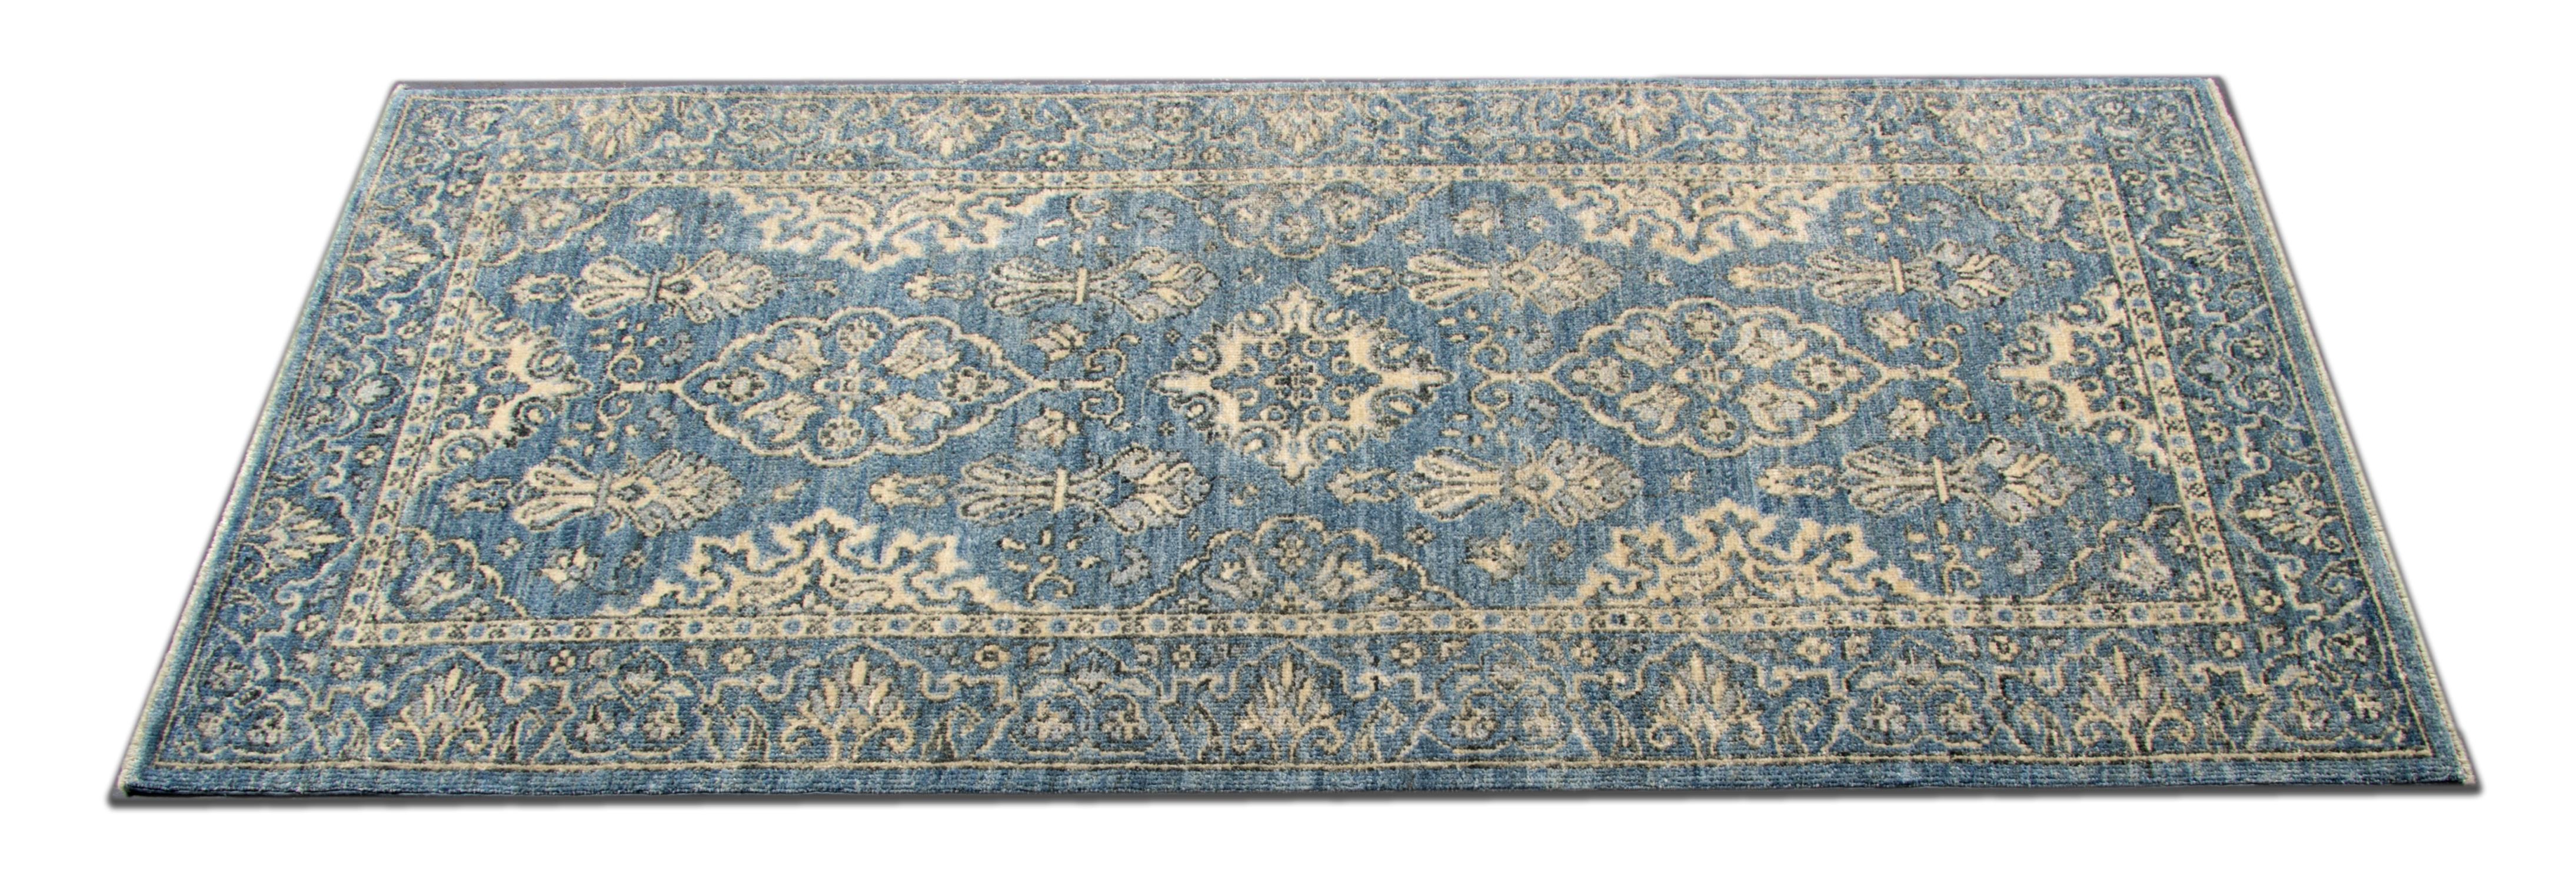 These new traditional handwoven runner rugs come from rug world in a striking colour combination of navy, light blue, green-blue and cream. The pattern depicted on these natural fibre rugs has traditional rugs style and have influenced by the